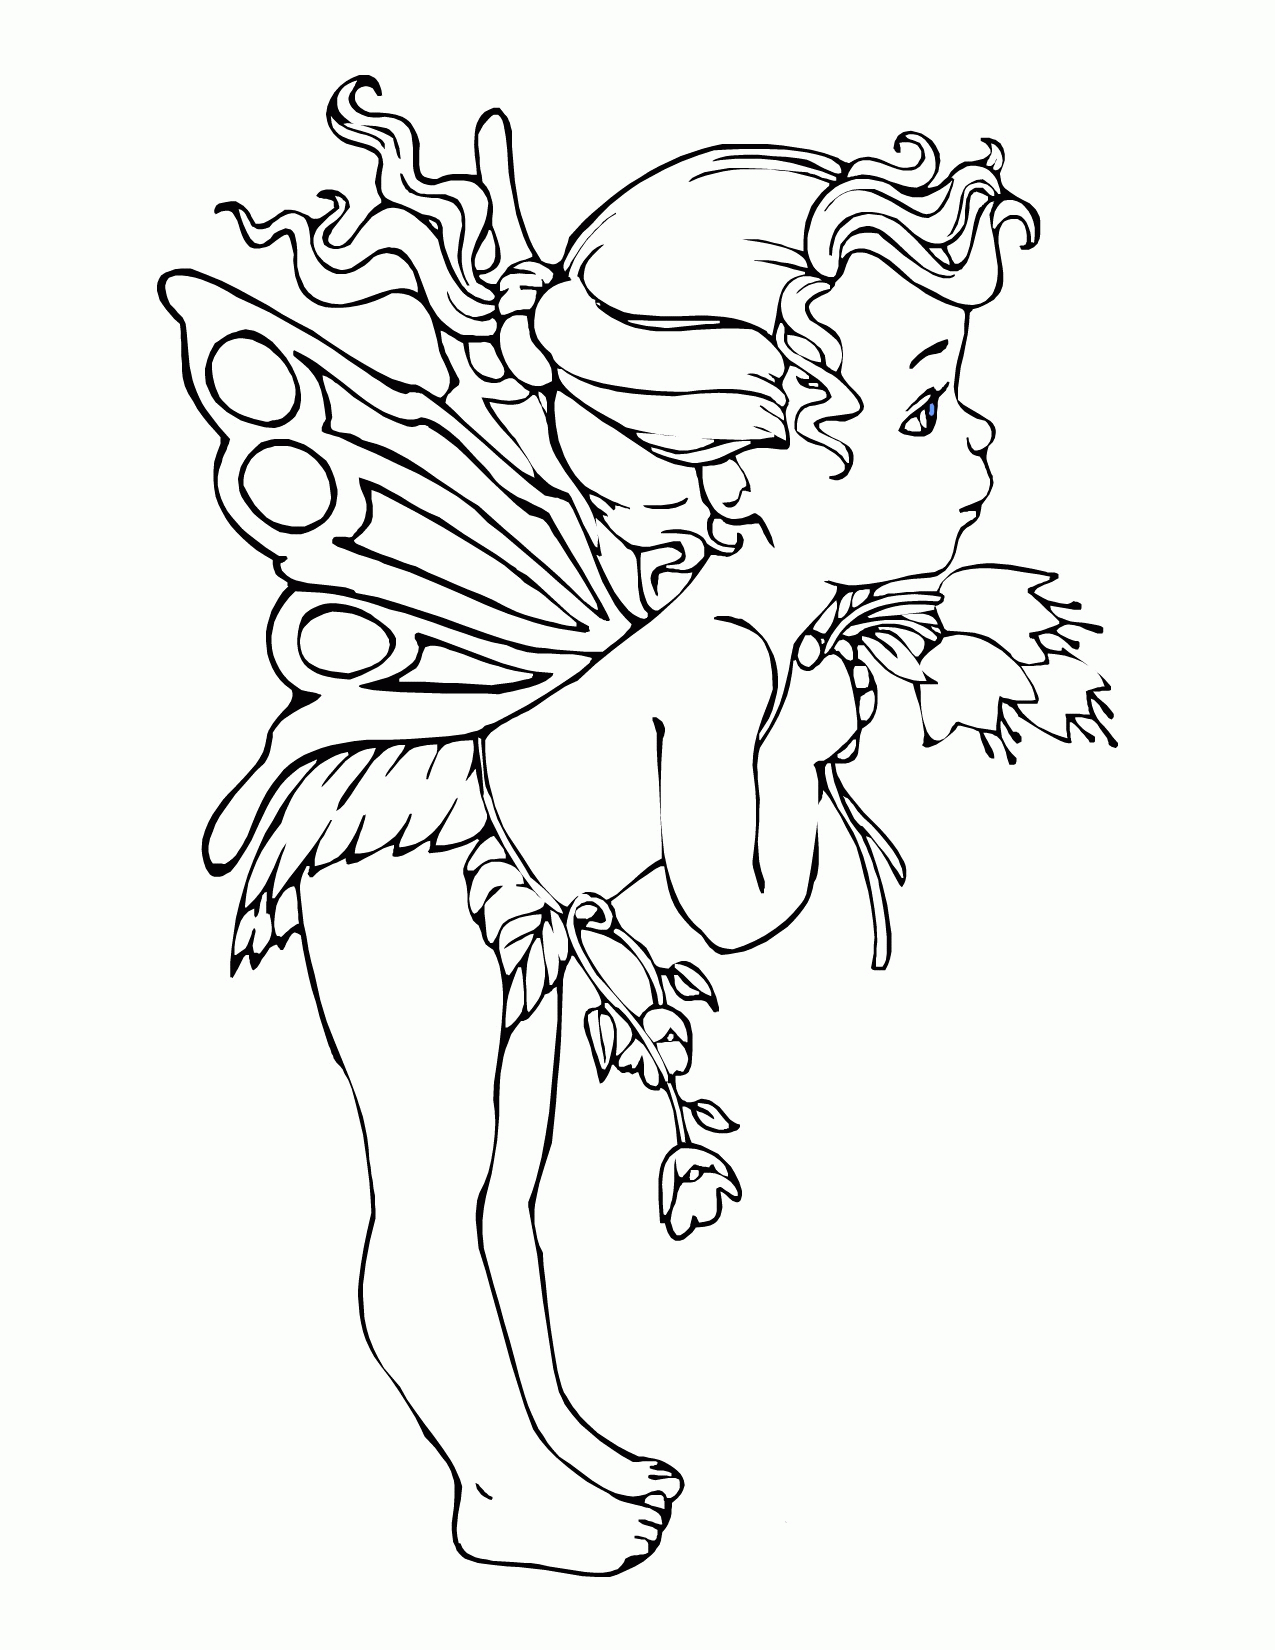 Free Printable Coloring Pages Fairies Adults Tooth Fairy For Kids Coloring Pages For Kids And For Adults